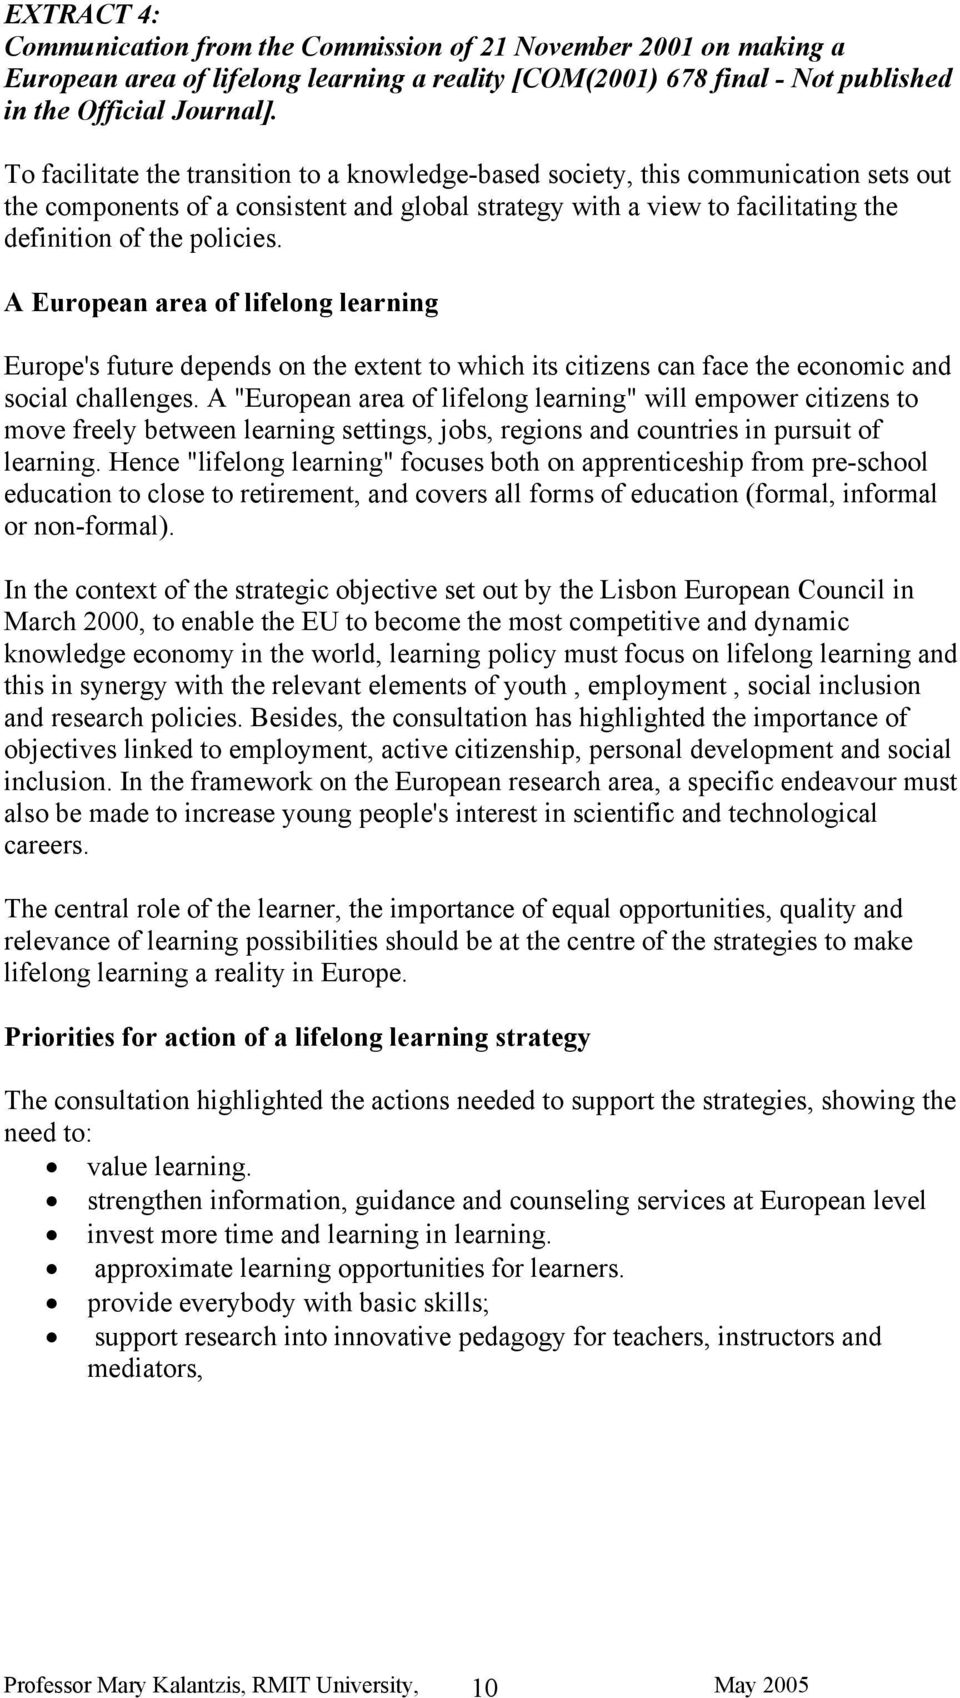 A European area of lifelong learning Europe's future depends on the extent to which its citizens can face the economic and social challenges.